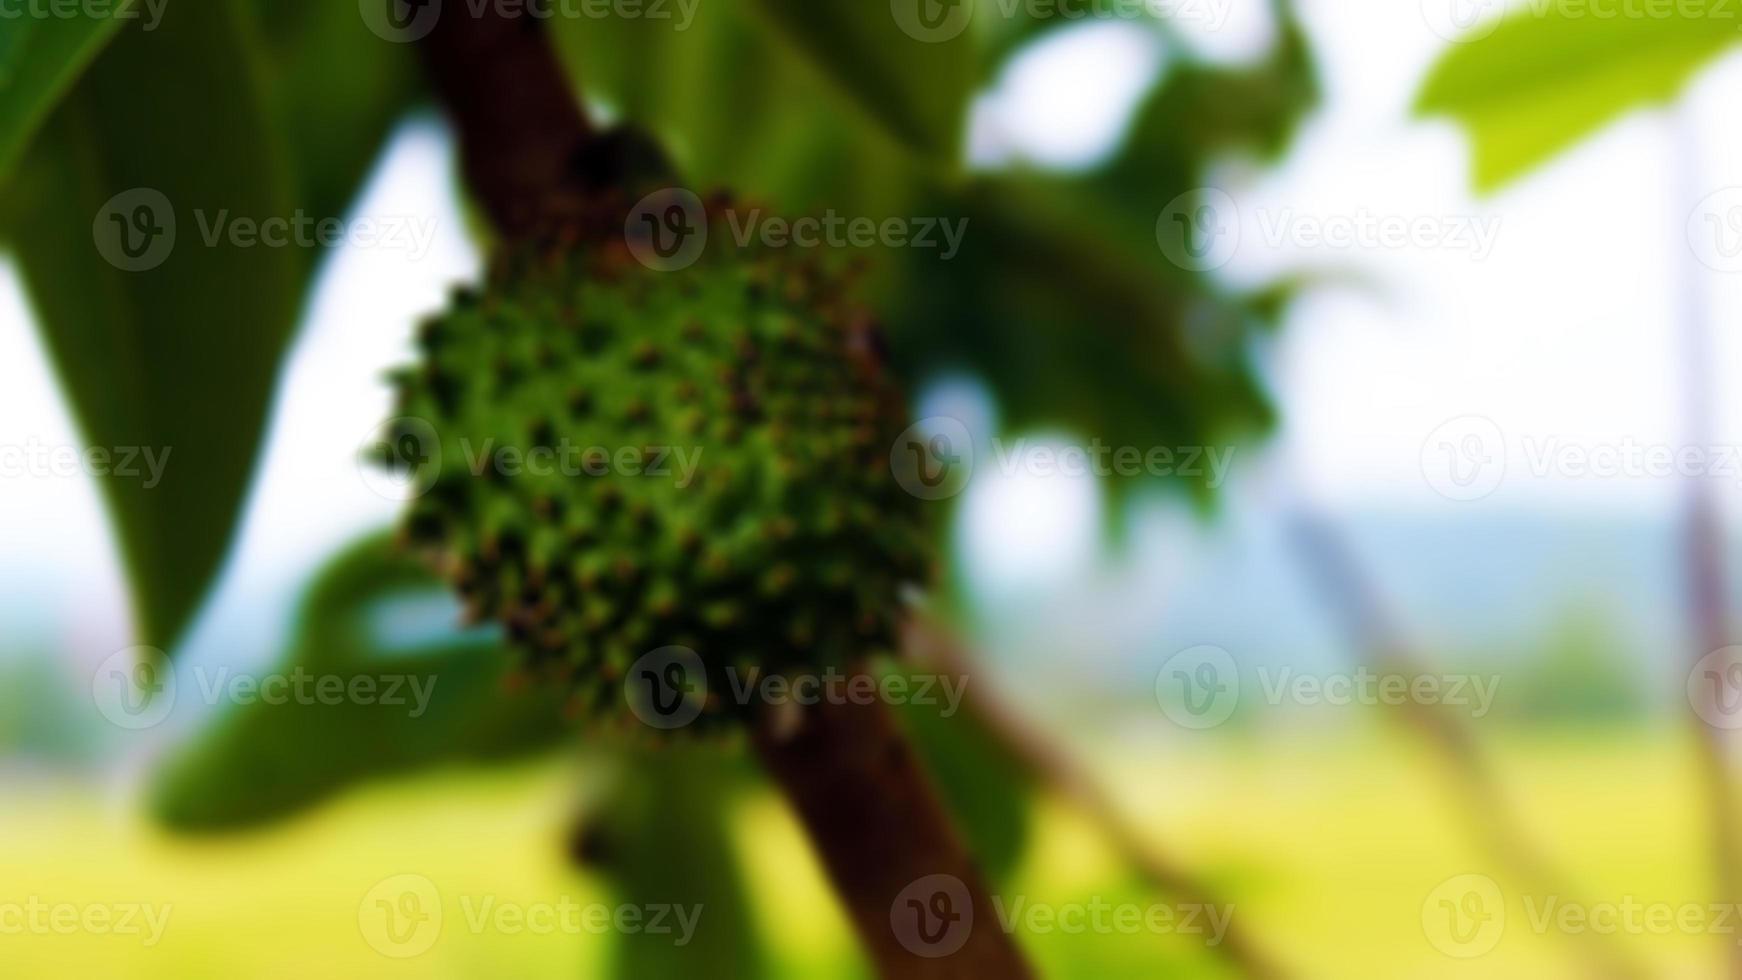 Blur photo of srikaya fruit. Suitable for backgrounds and typography